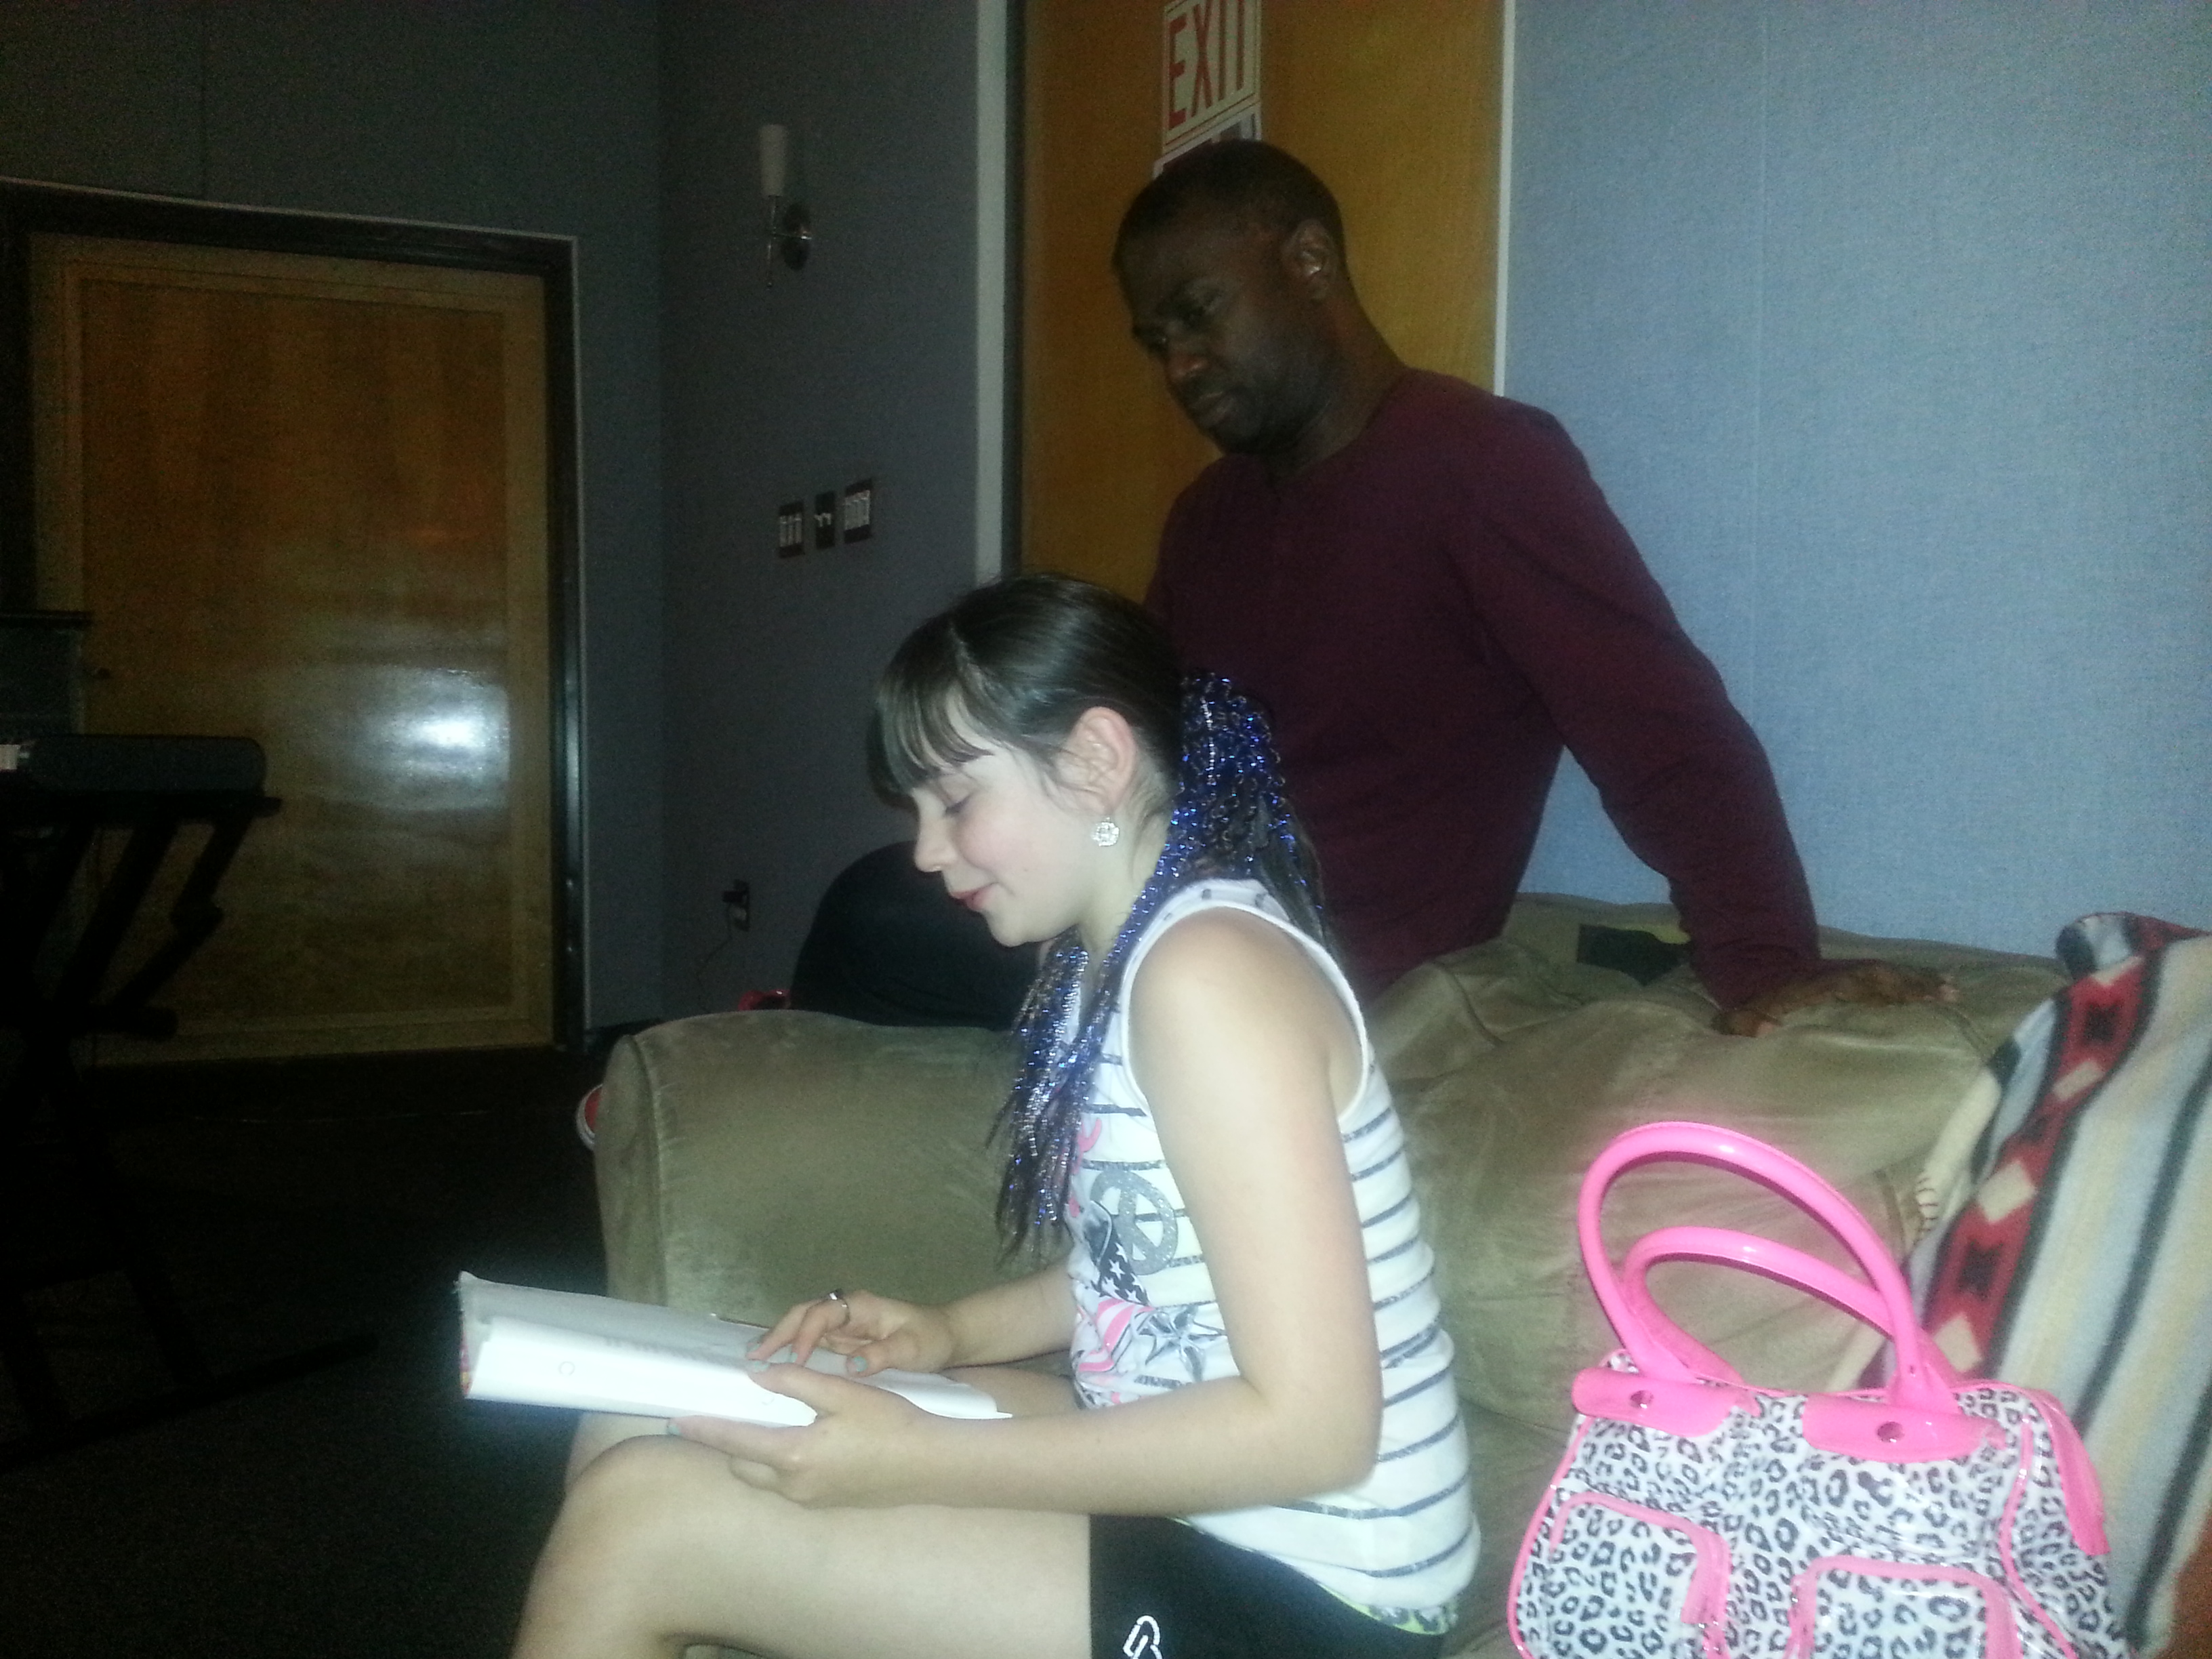 Angel B and Andrew working on a Grammy submission!